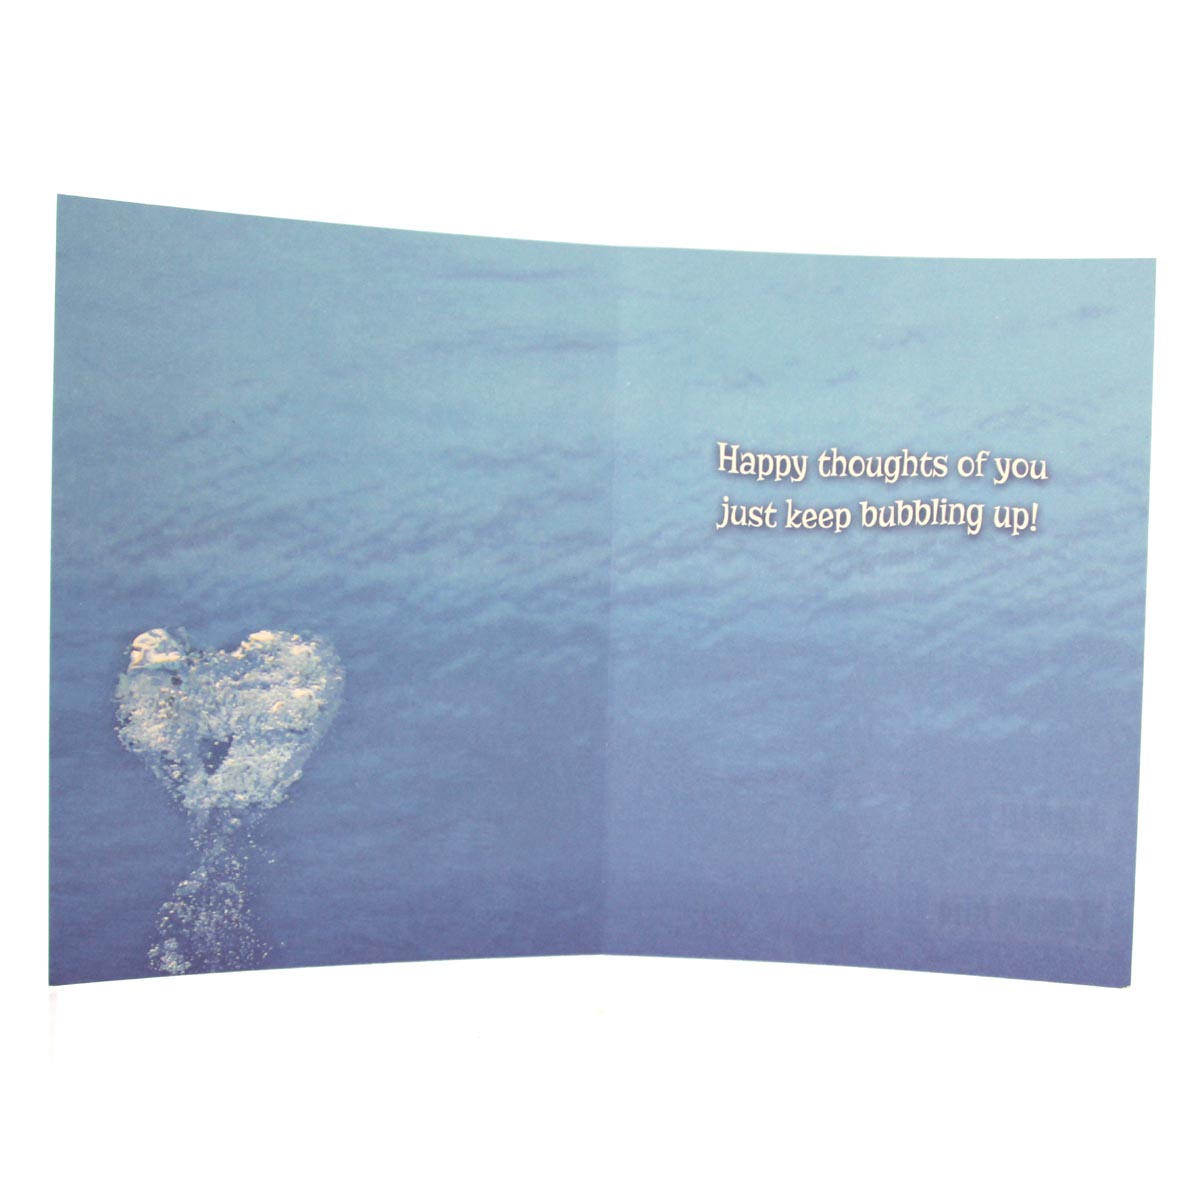 Thinking of You Card: (image of dolphin)